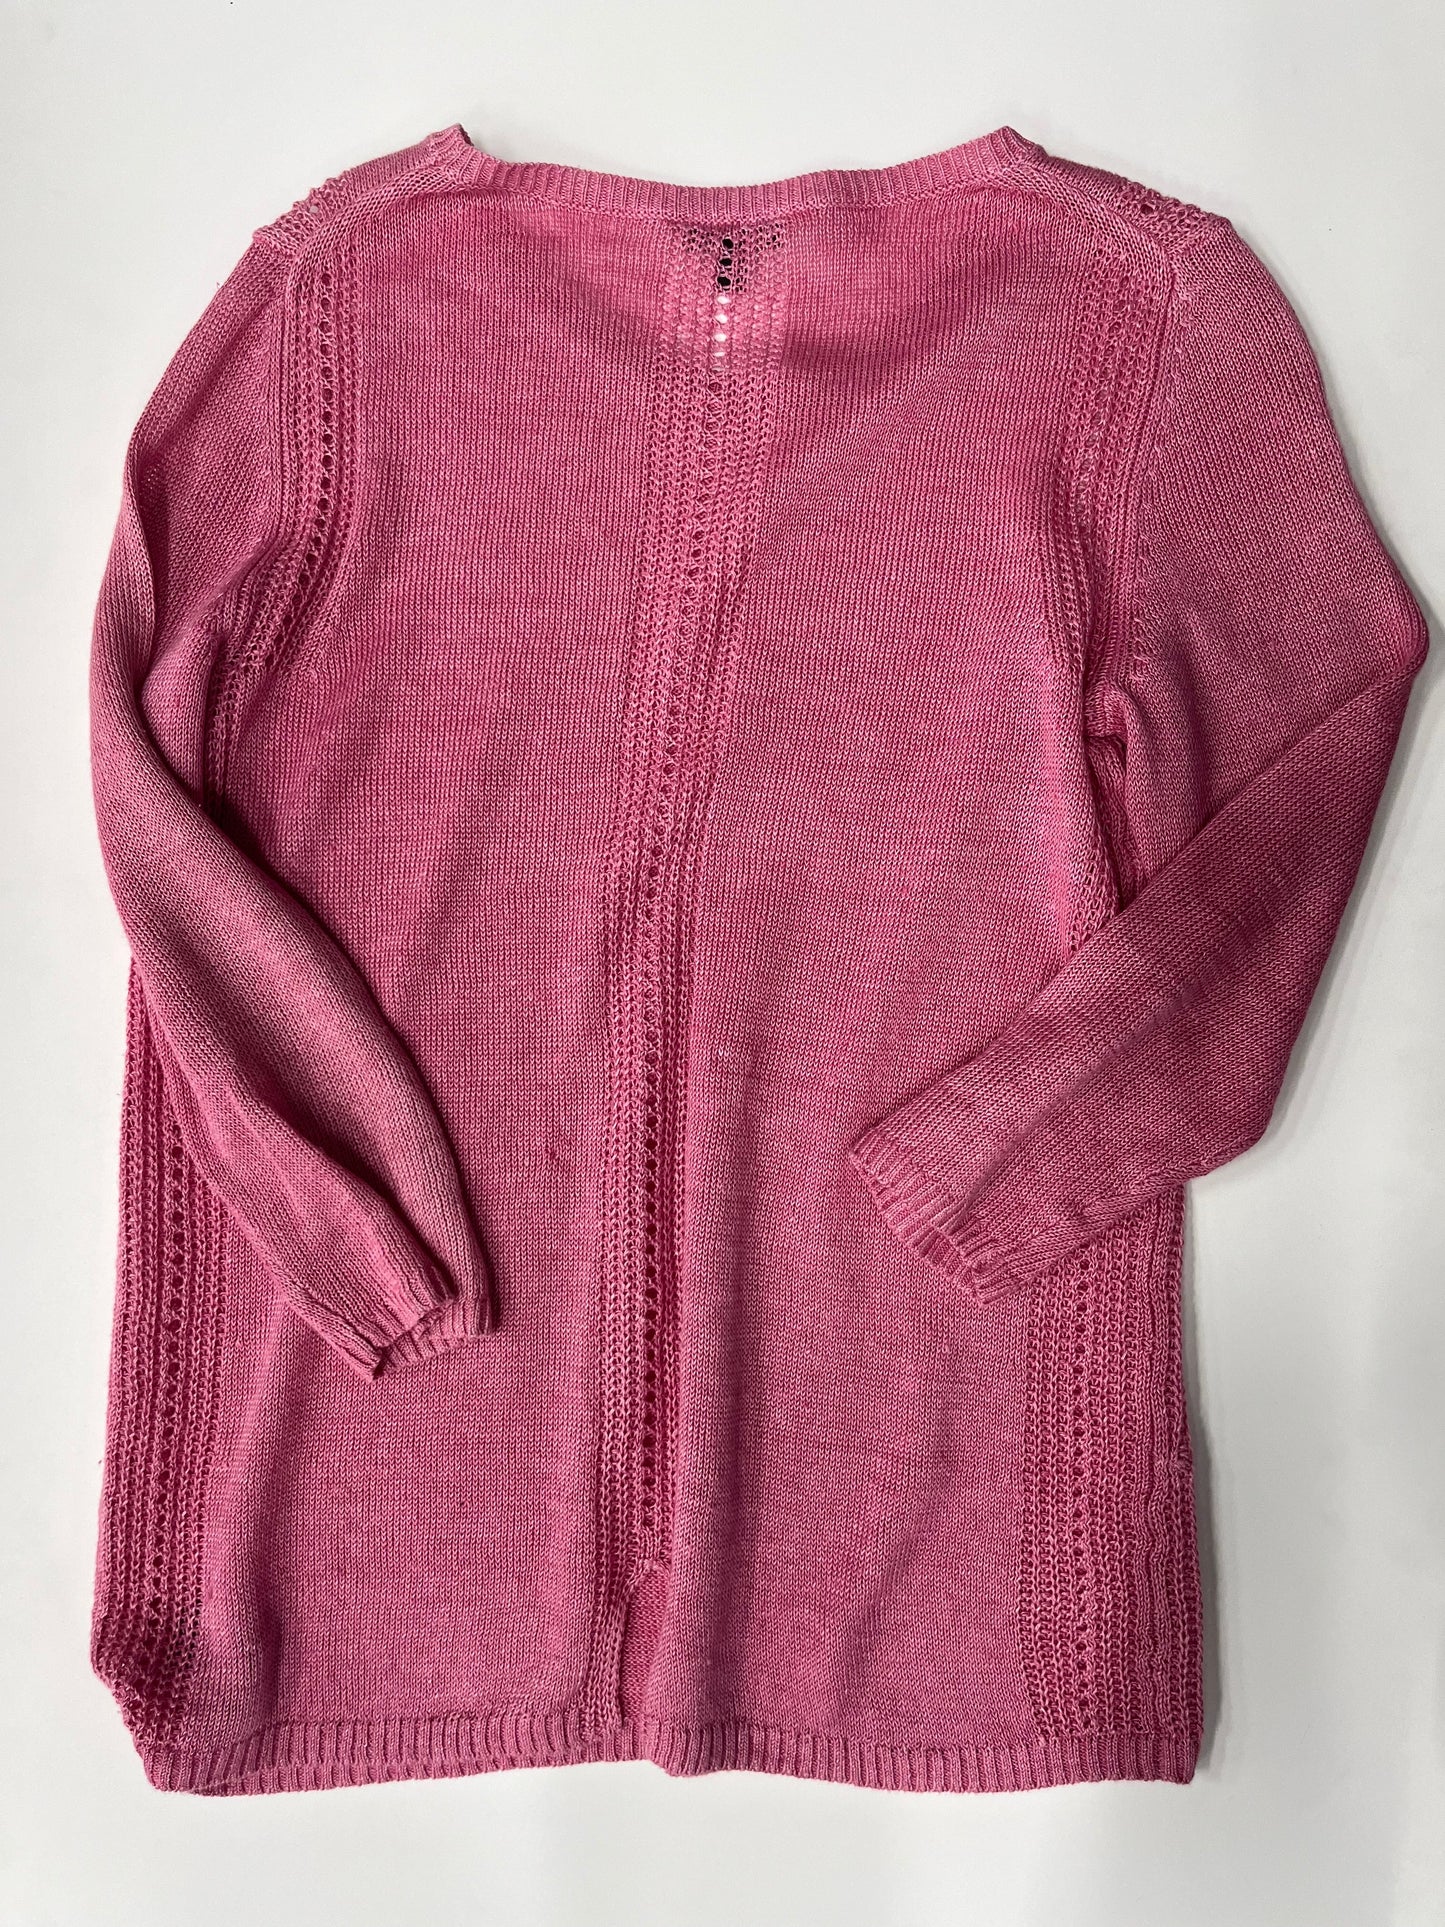 Sweater Lightweight By Talbots  Size: S